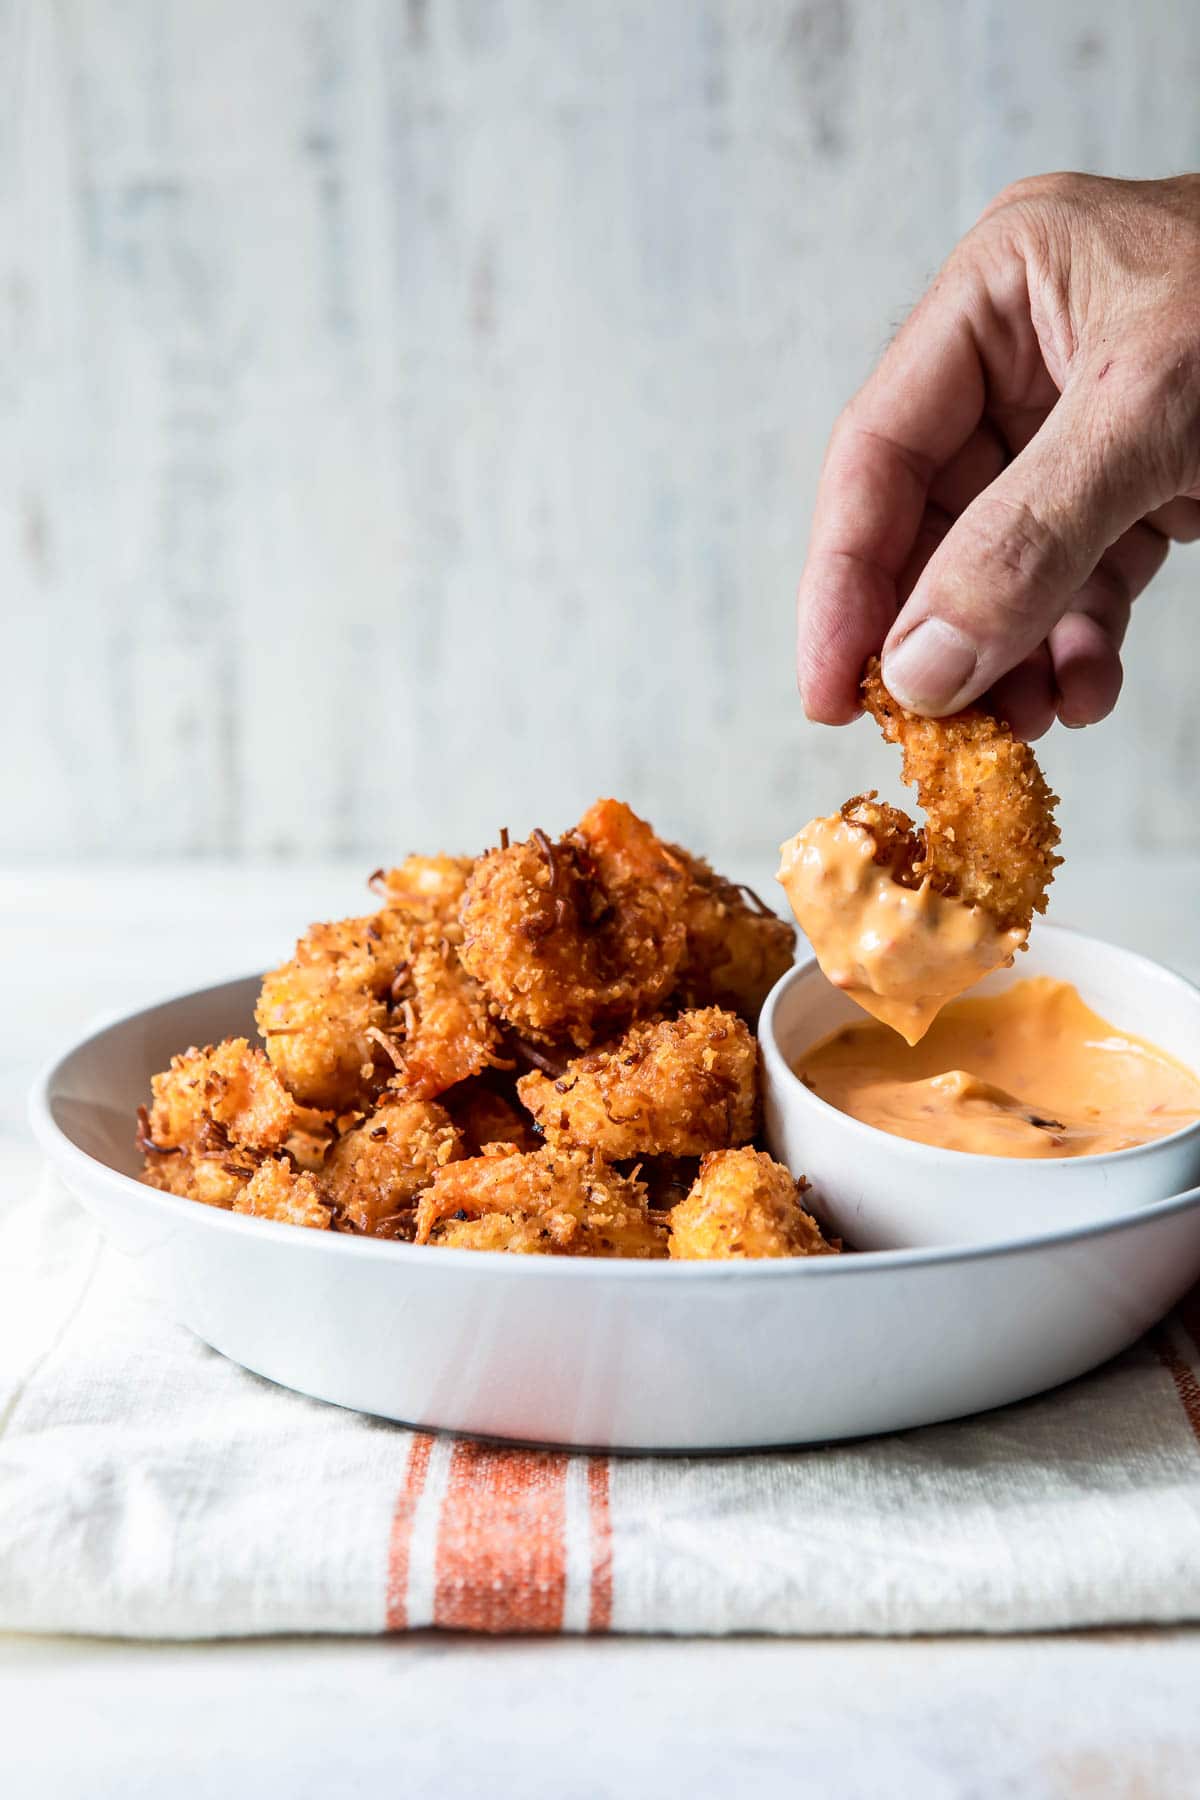 Coconut shrimp being dipped in an orange sauce.